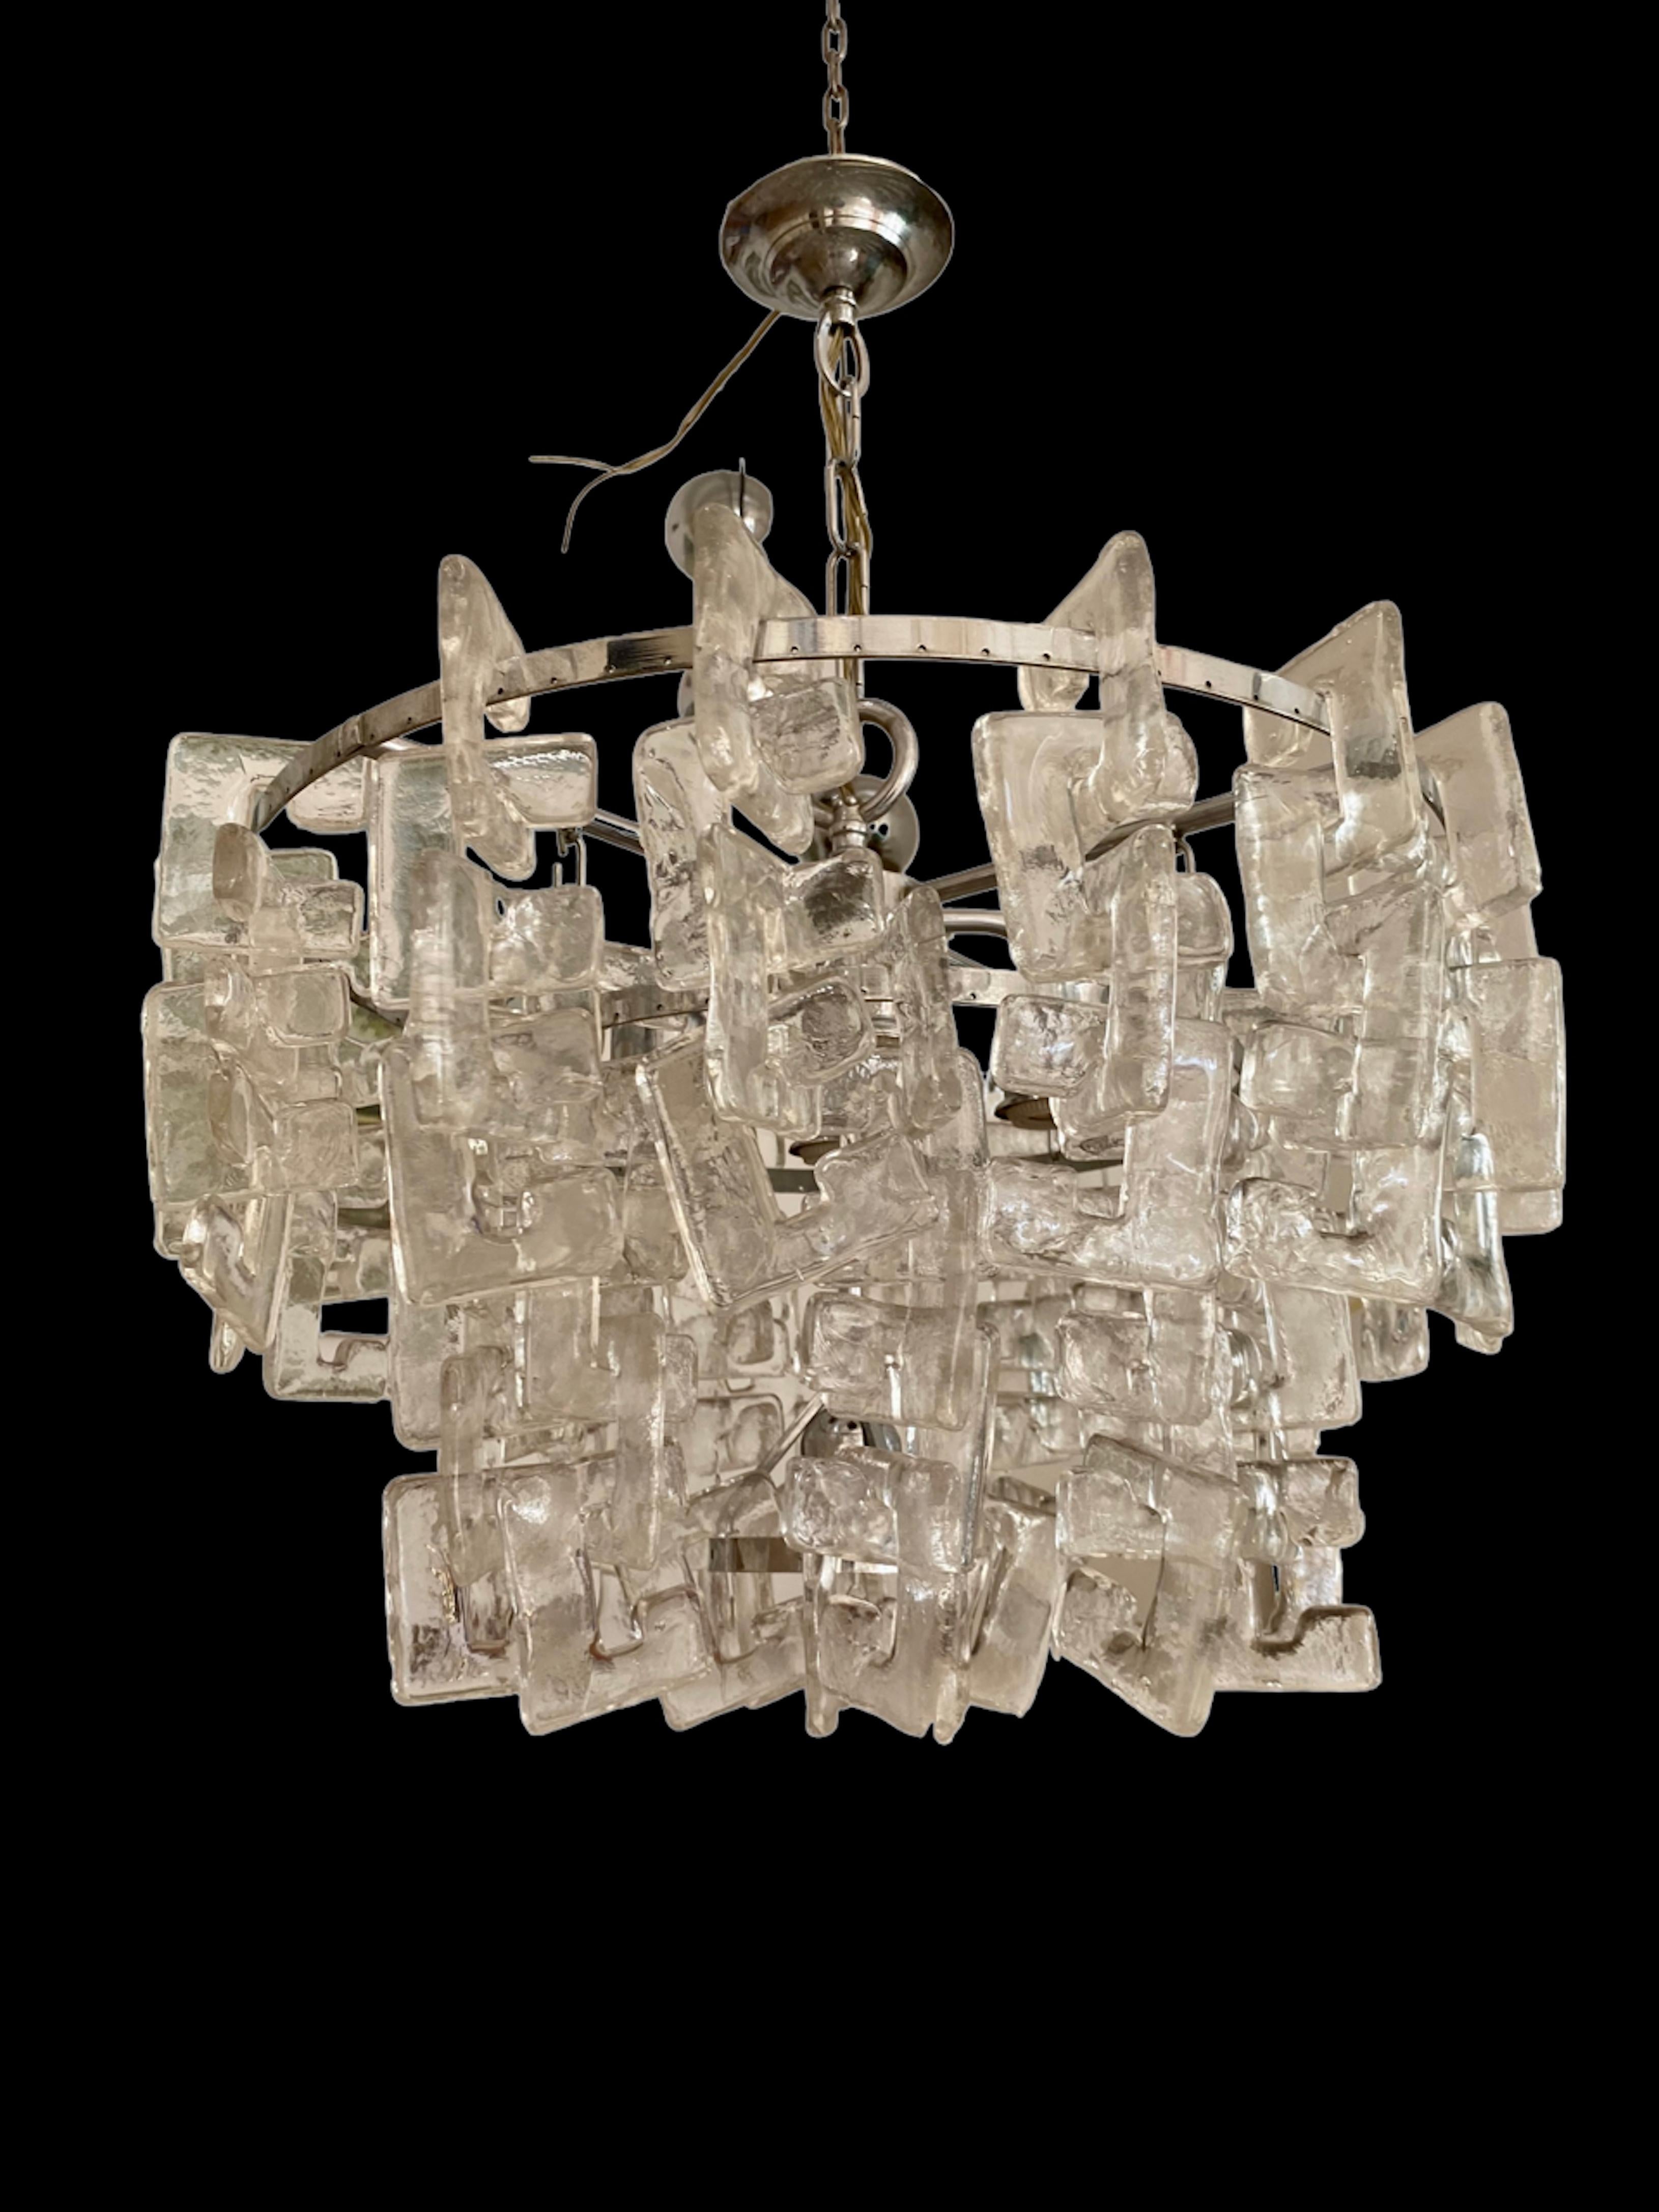 Carlo nason by mazzega chandelier , unique model in size XXL. glass of
murano in frosted glass design. Very rare model of glass with a chrome structure. An iconic lamp of Italian design, a unique element for an atmosphere of great luxury .
discount